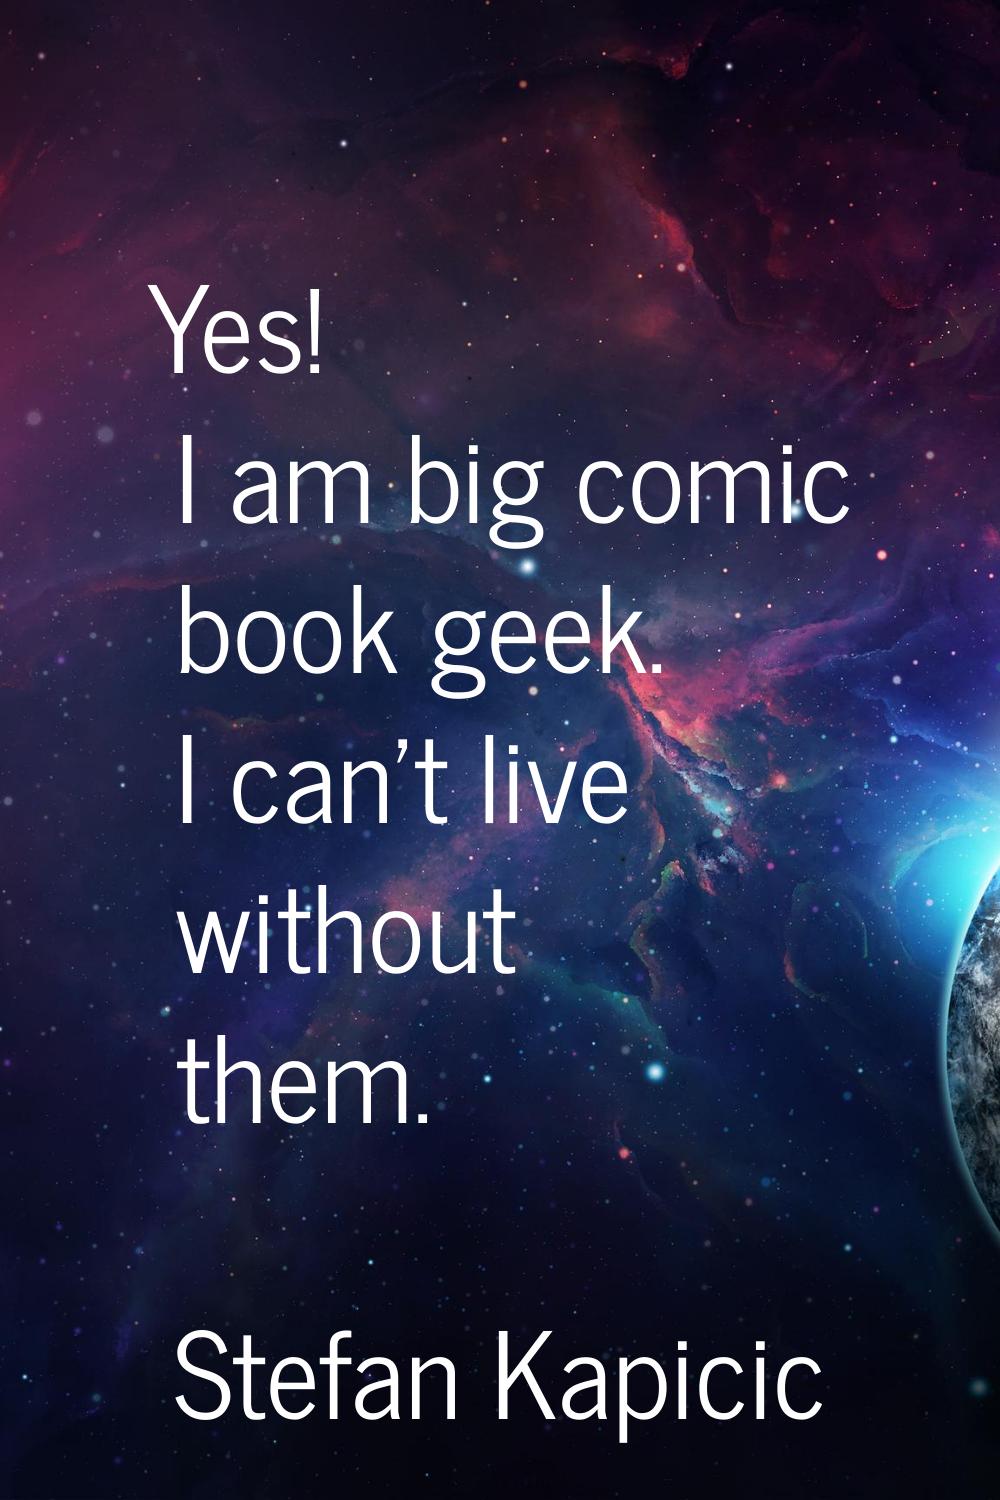 Yes! I am big comic book geek. I can't live without them.